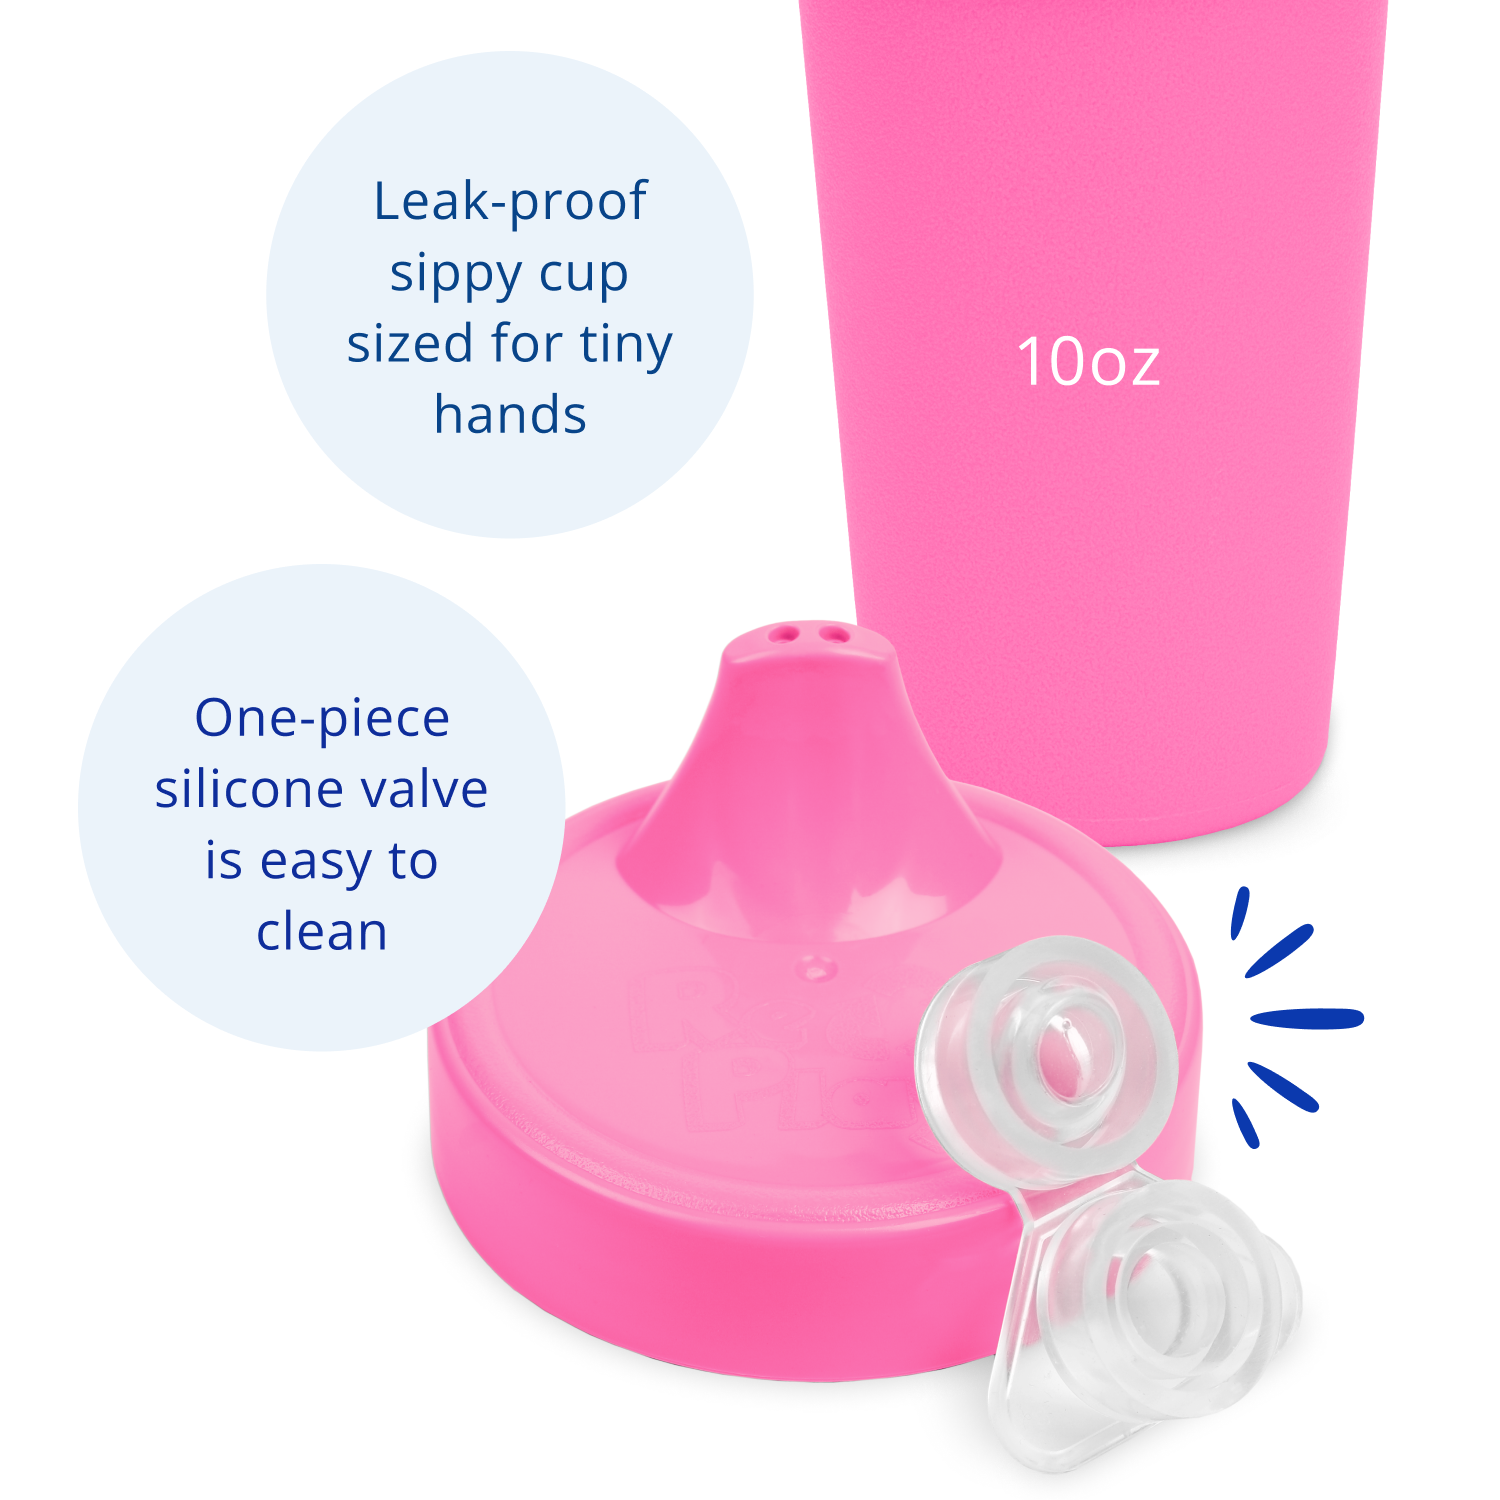 Re-Play Toddler Tableware - No Spill Cups – Crunch Natural Parenting